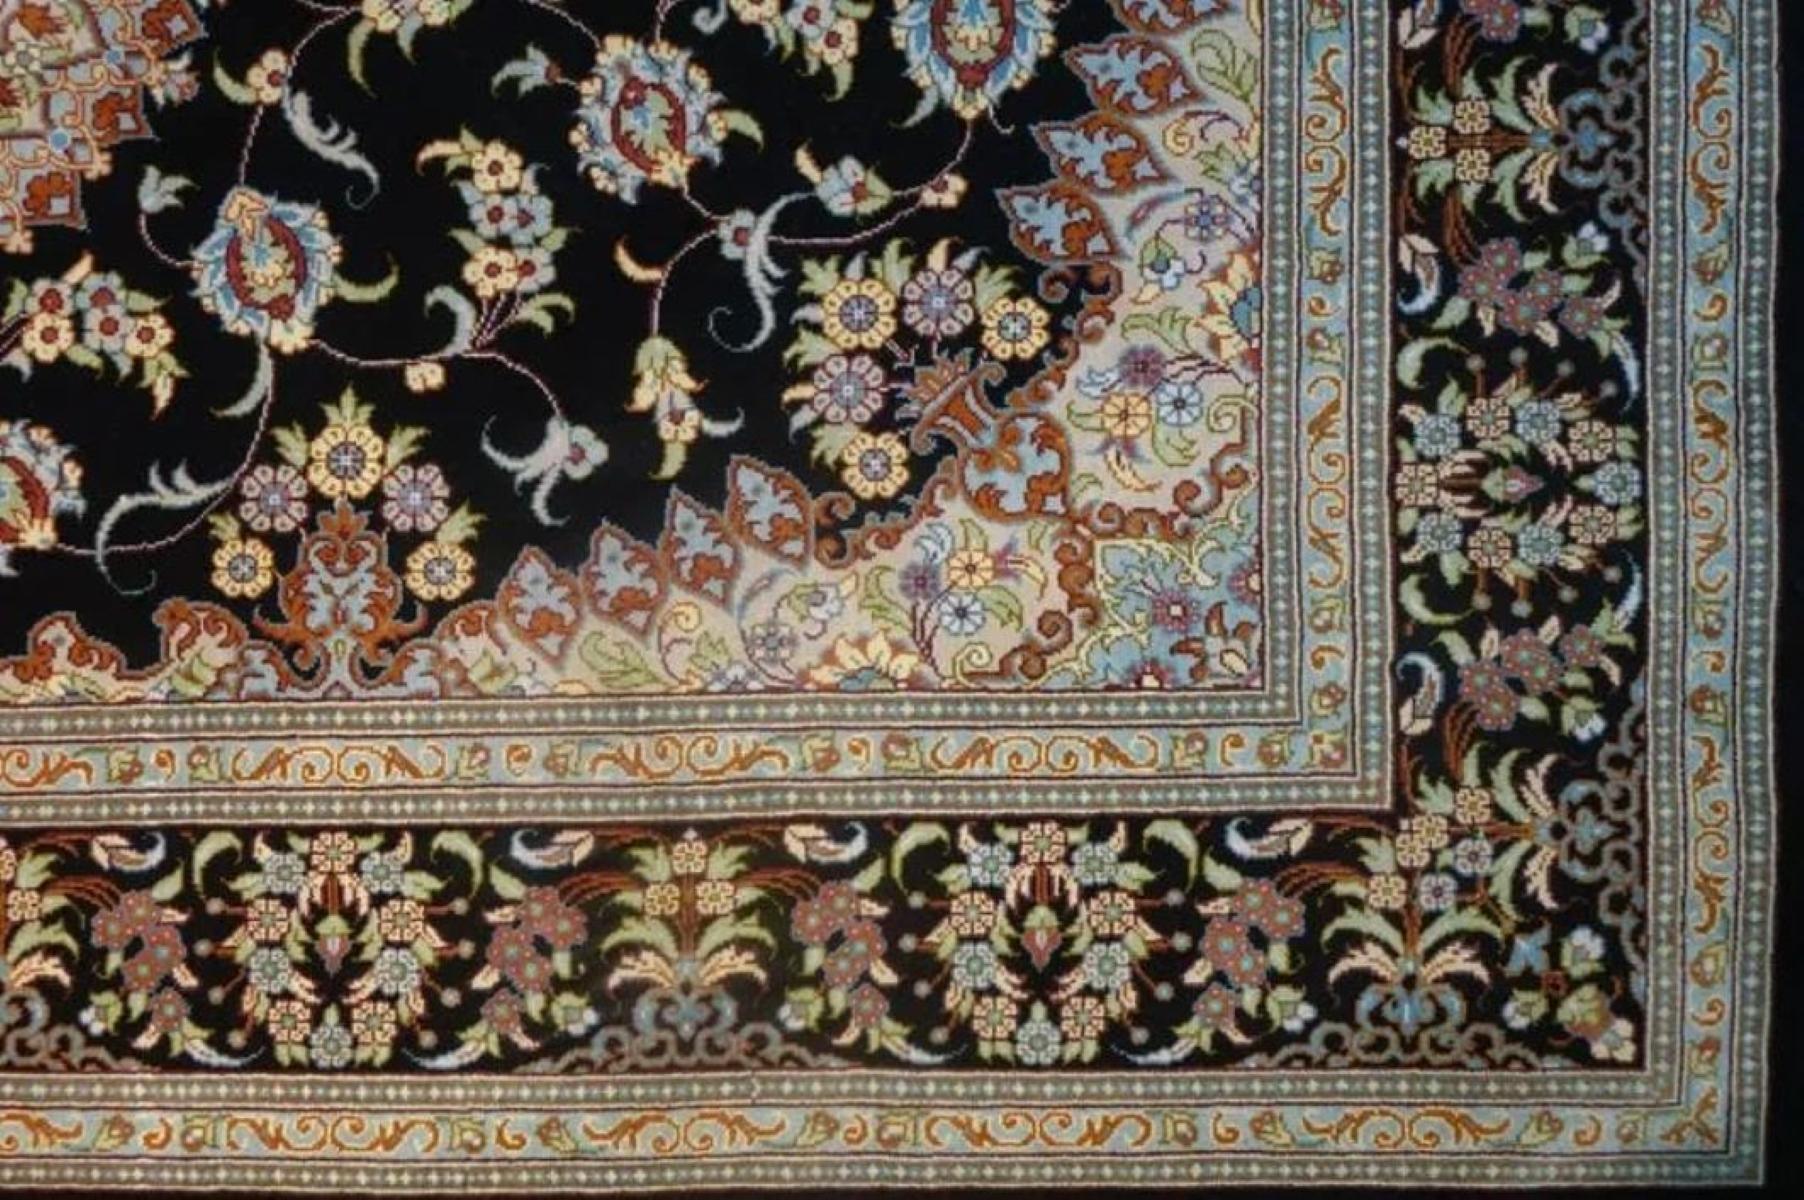 Very fine Persian Rug Qum 700 Knots per inch, Size 5 x 3.5 Iran Qum Esmeili Silk and Silk foundation. Around 1,700,000 knots tied by hand one by one. It takes a year to complete this piece of art.